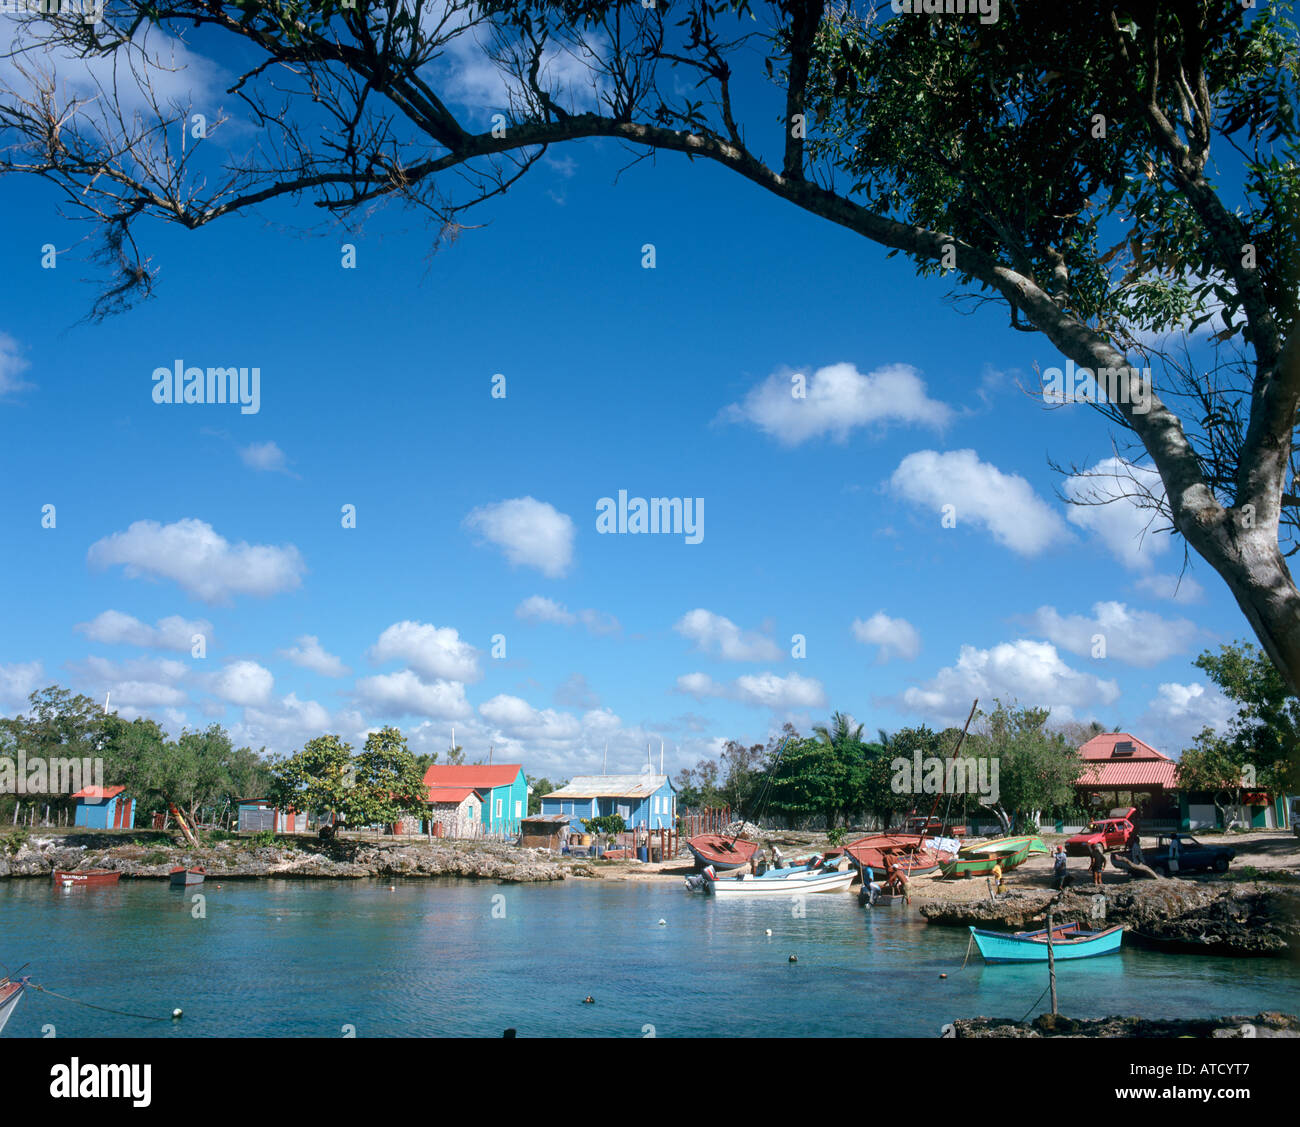 The fishing village of Bayahibe in 1998, South Coast, Dominican Republic, Caribbean Stock Photo